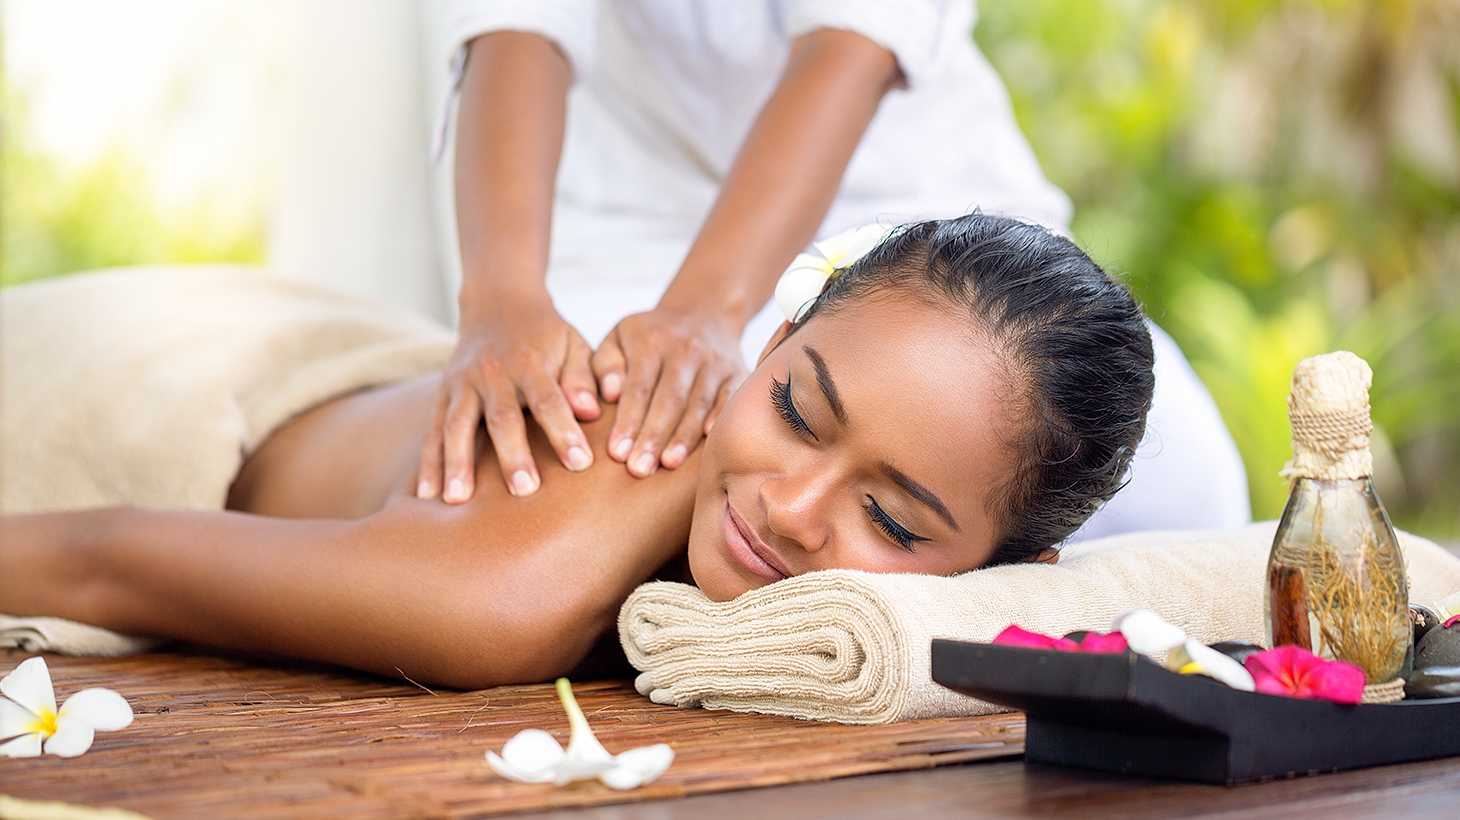 Rejuvenate with a Day Spa Pamper Package in Toowong from White Orchid Thai Day...